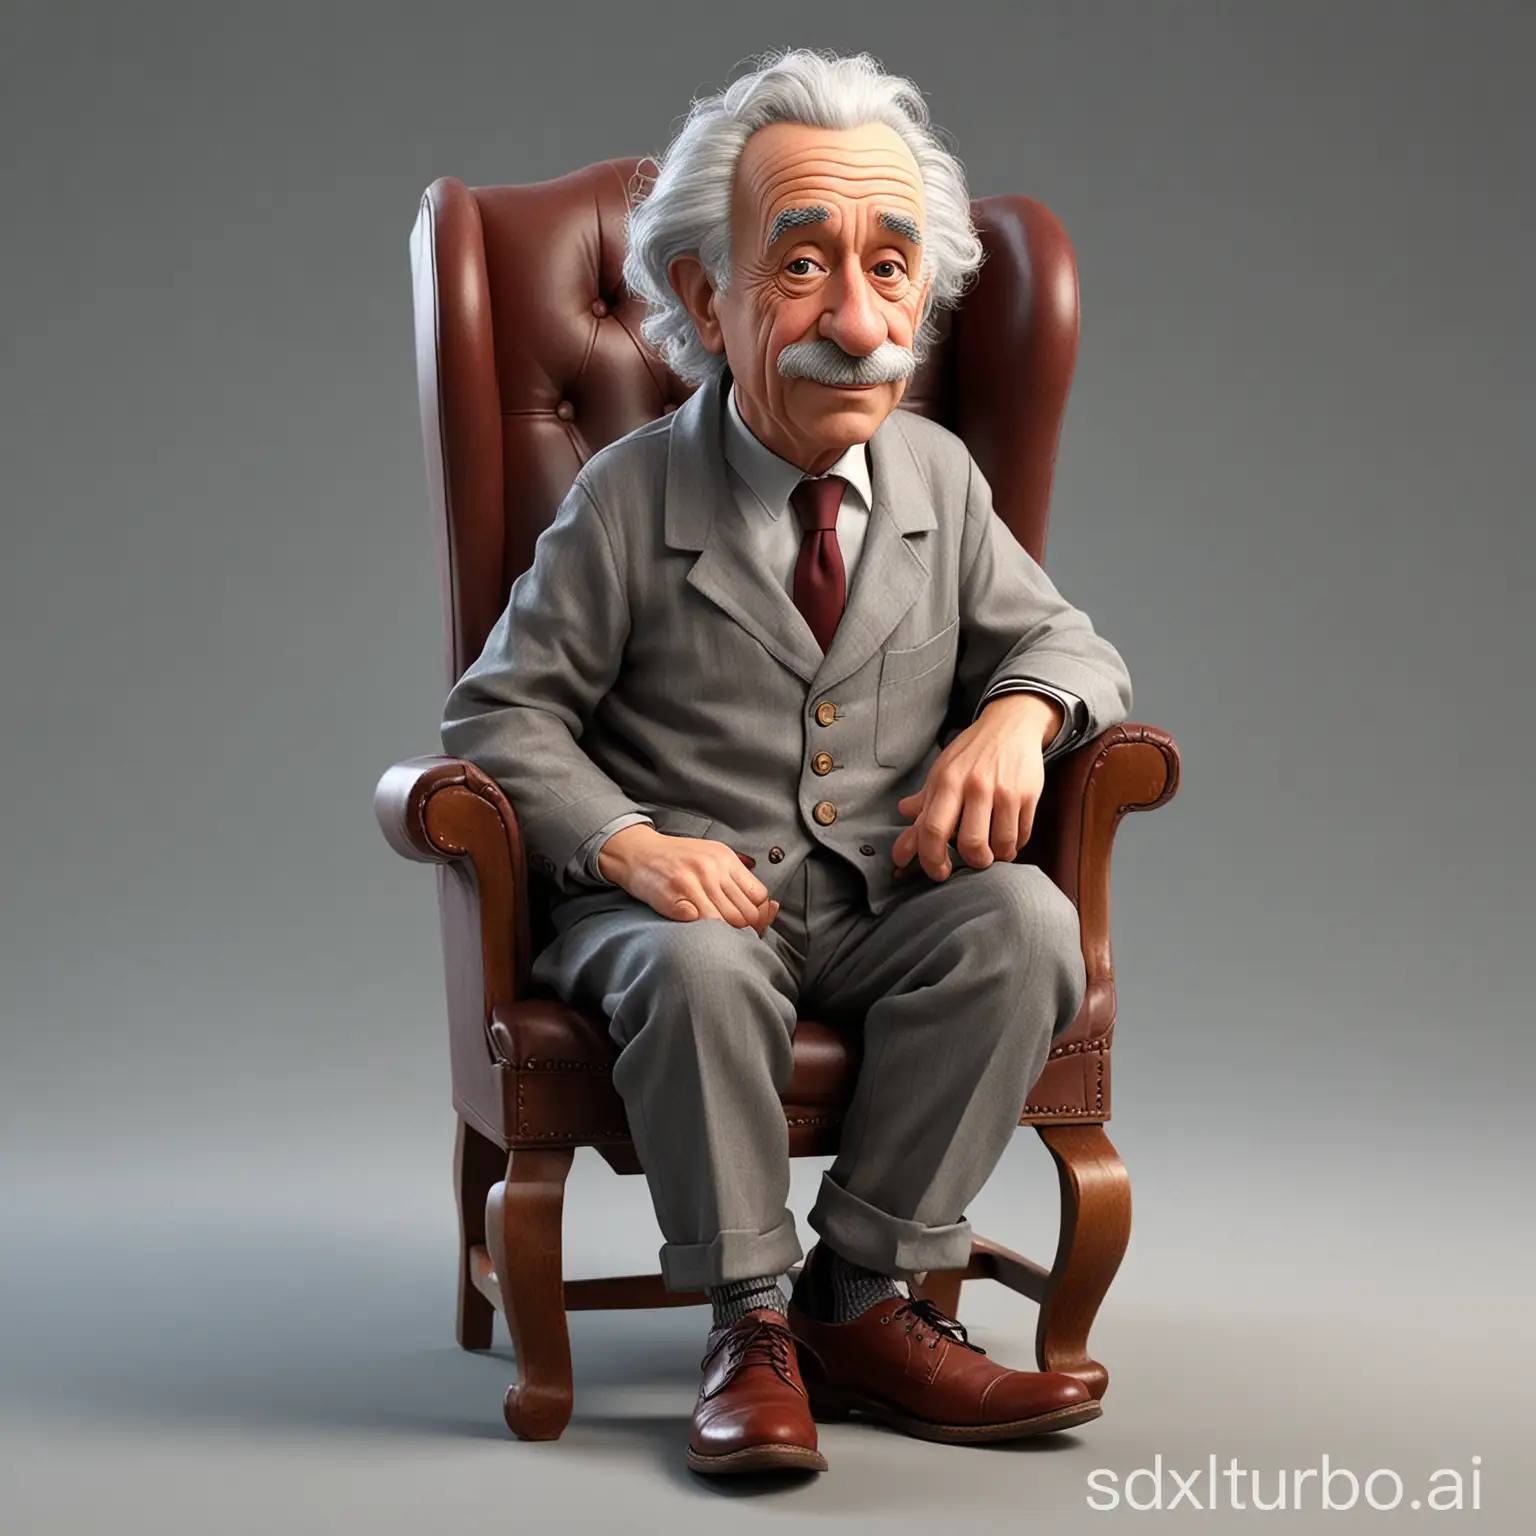 Crete a Caricature 3D Realistic Disney pixar style full body with a big head. "Albert Einstein" a 60 year old man, is sitting relaxed in a classic dark red wingback wooden chair, the wood texture is clear. Wearing a white t-shirt covered with a gray jacket, wearing worn gray cloth trousers. Wearing brown shoes with black shoelaces. Sit with your legs crossed, your right hand holding a short wooden stick, your left hand placed on the edge of the chair. The background should contrast with the color of the chair and clothing,enhancing the overall composition of the picture. Use soft photography lighting, dramatic overhead lighting, very high image quality, clear character details, UHD, 16k.